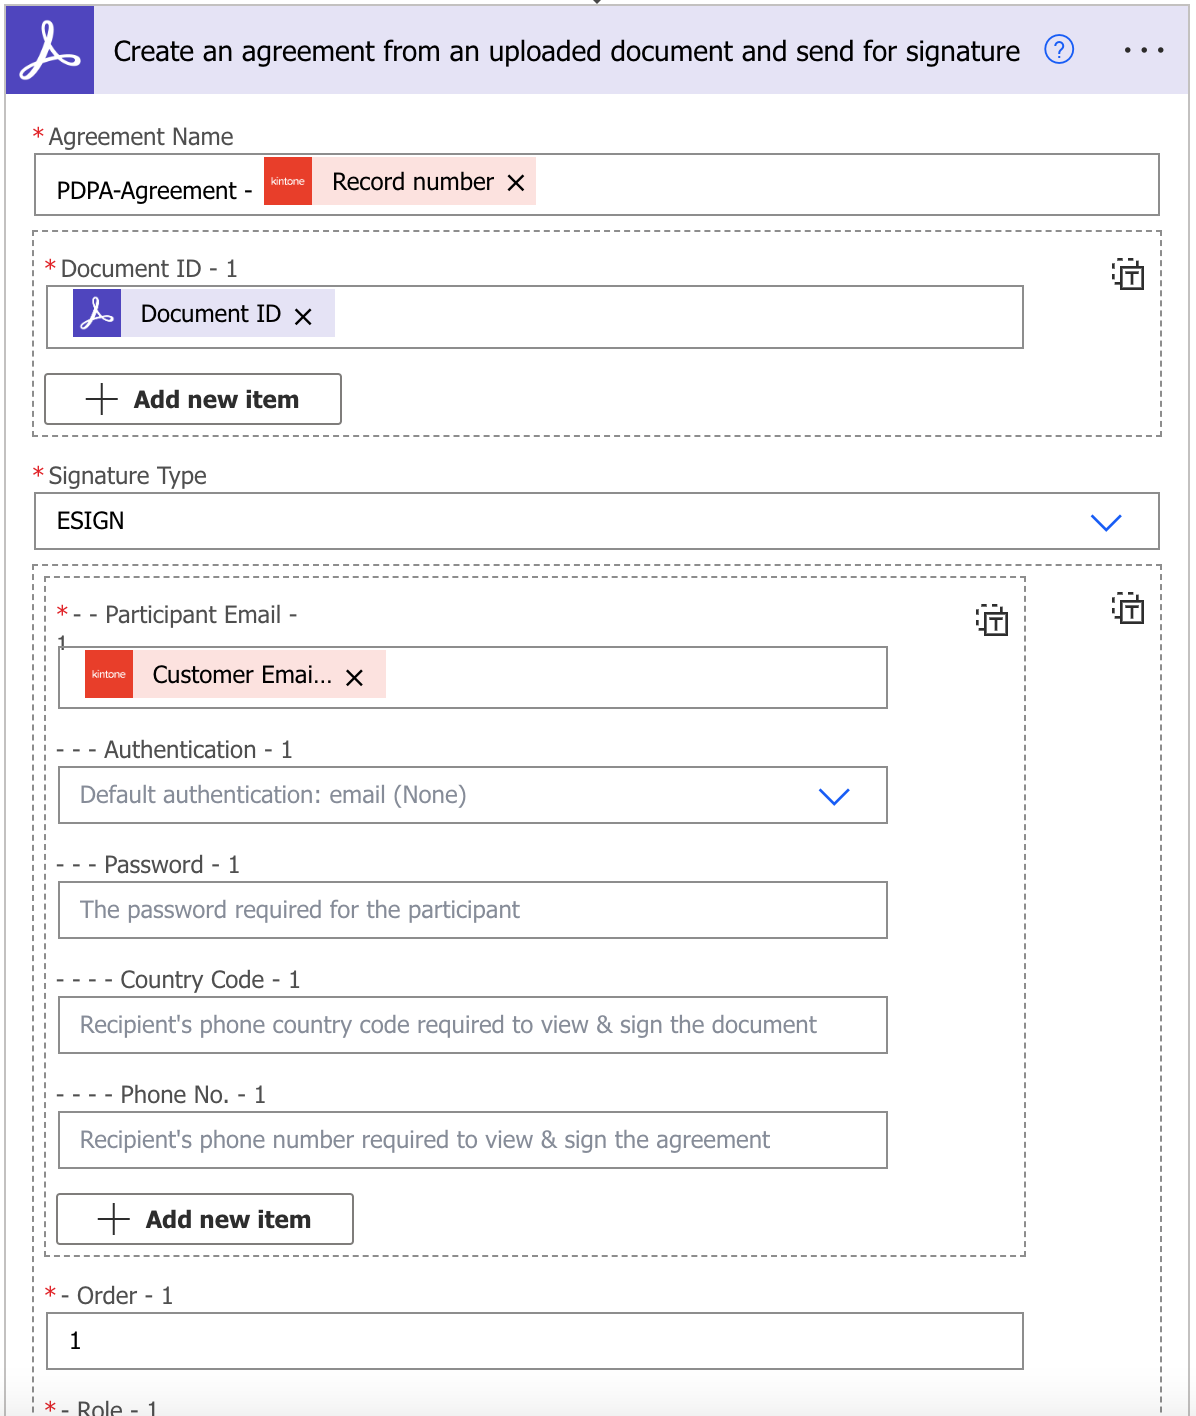 Screenshot: Options of the create an agreement from an uploaded document and send for signature flow.